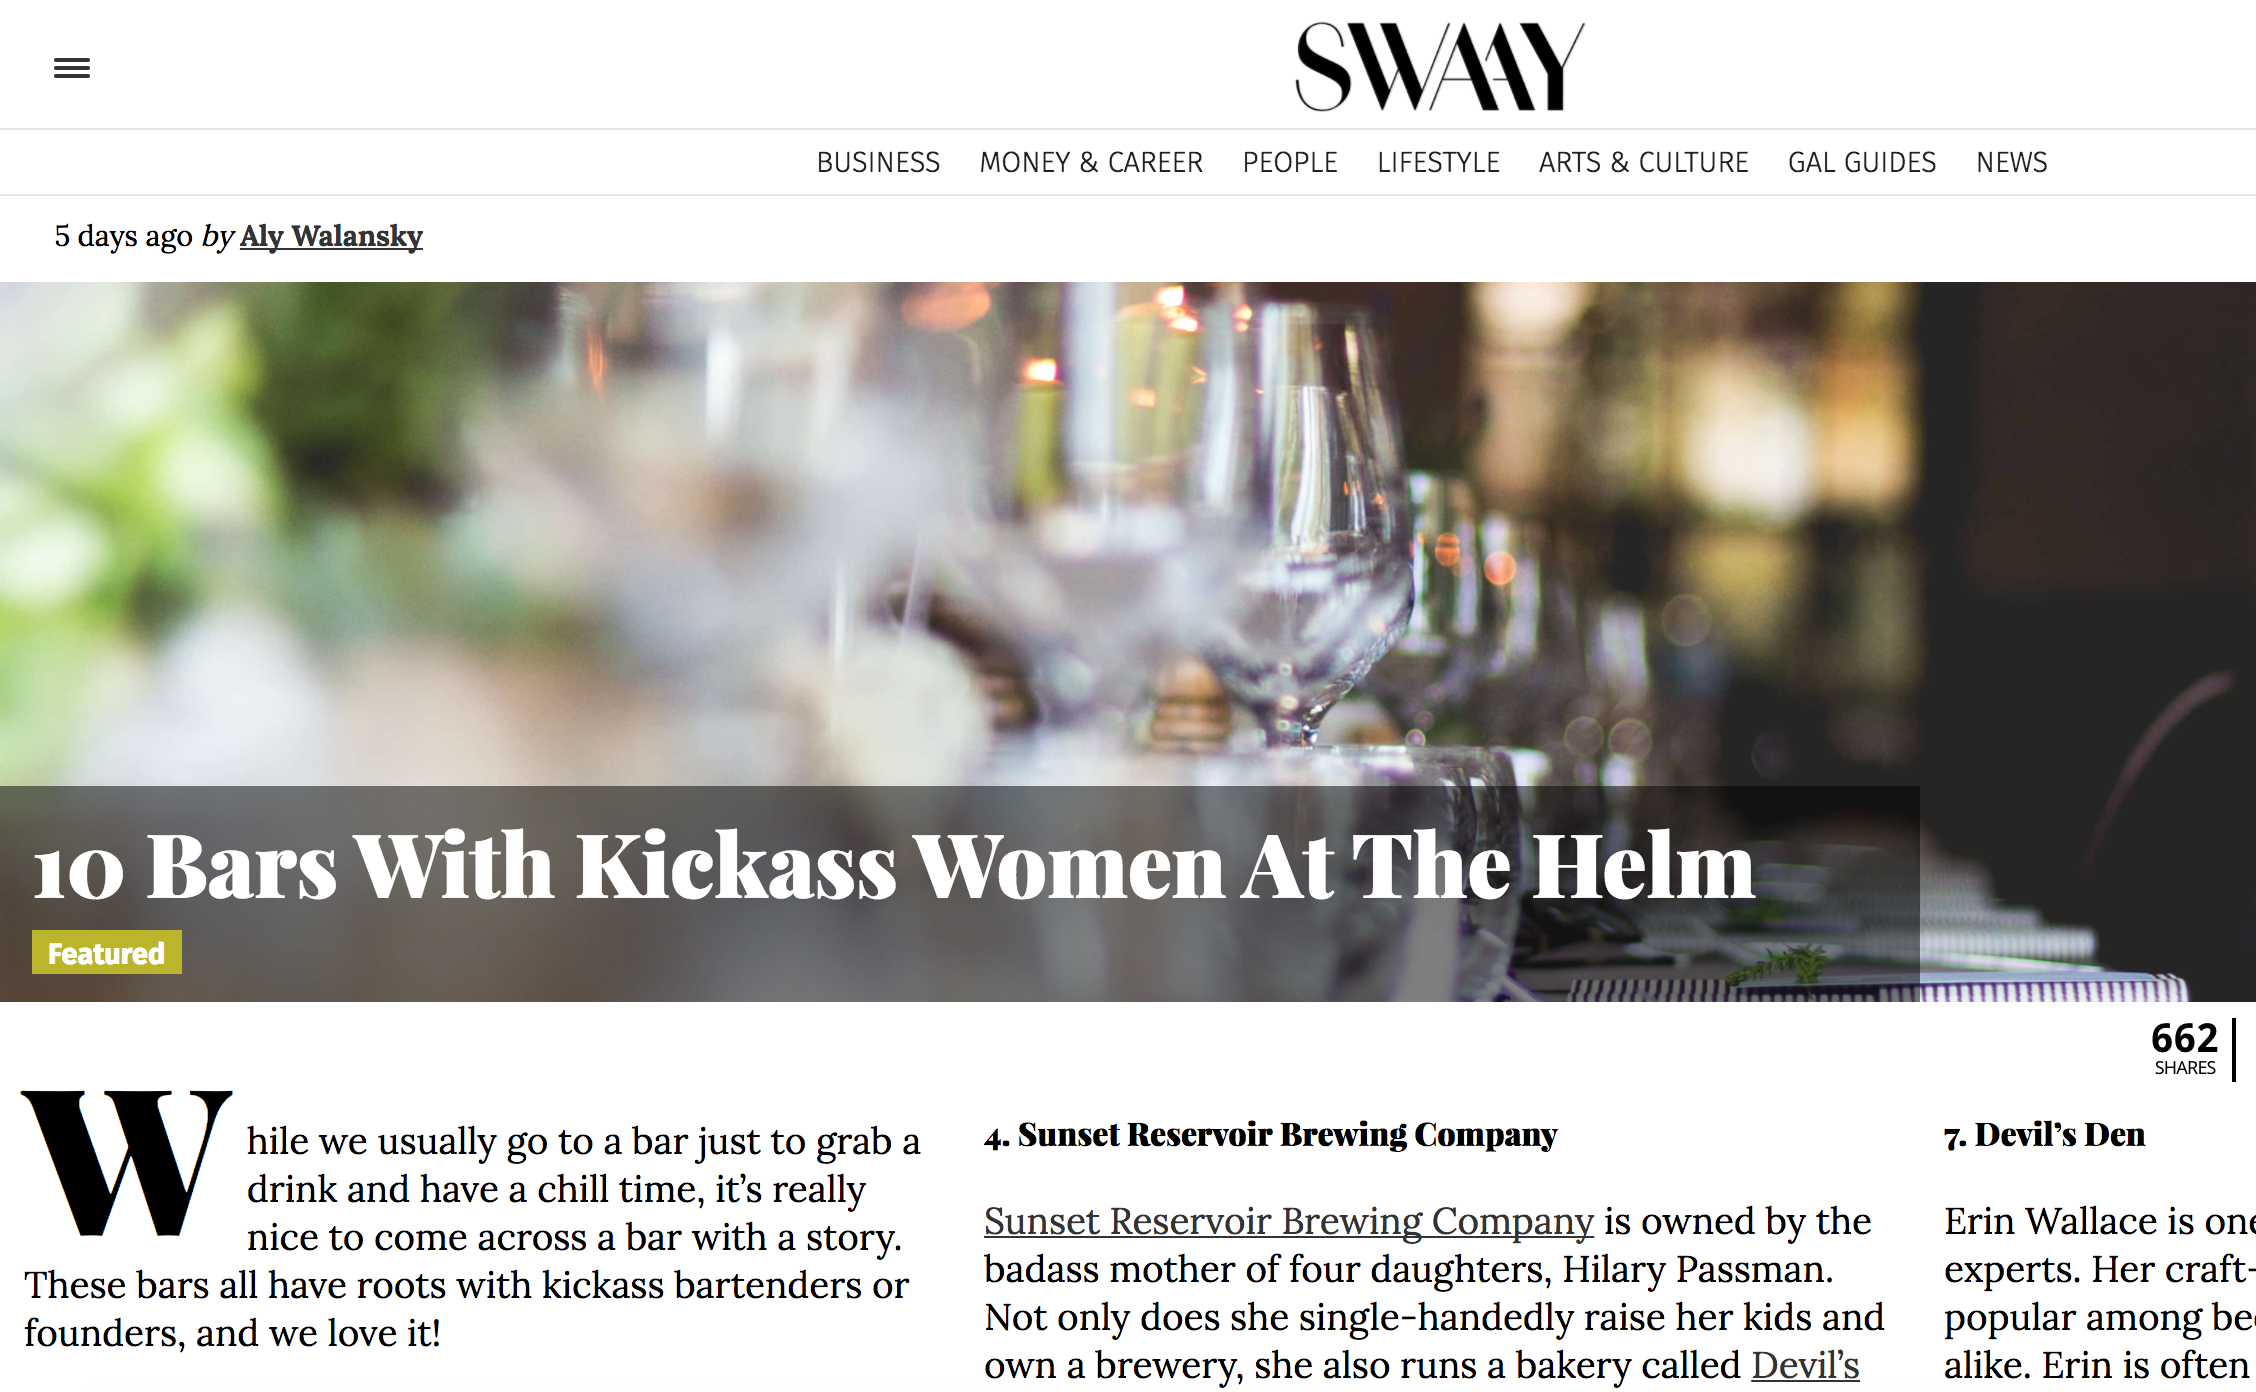 10 Bars With Kickass Women at the Helm